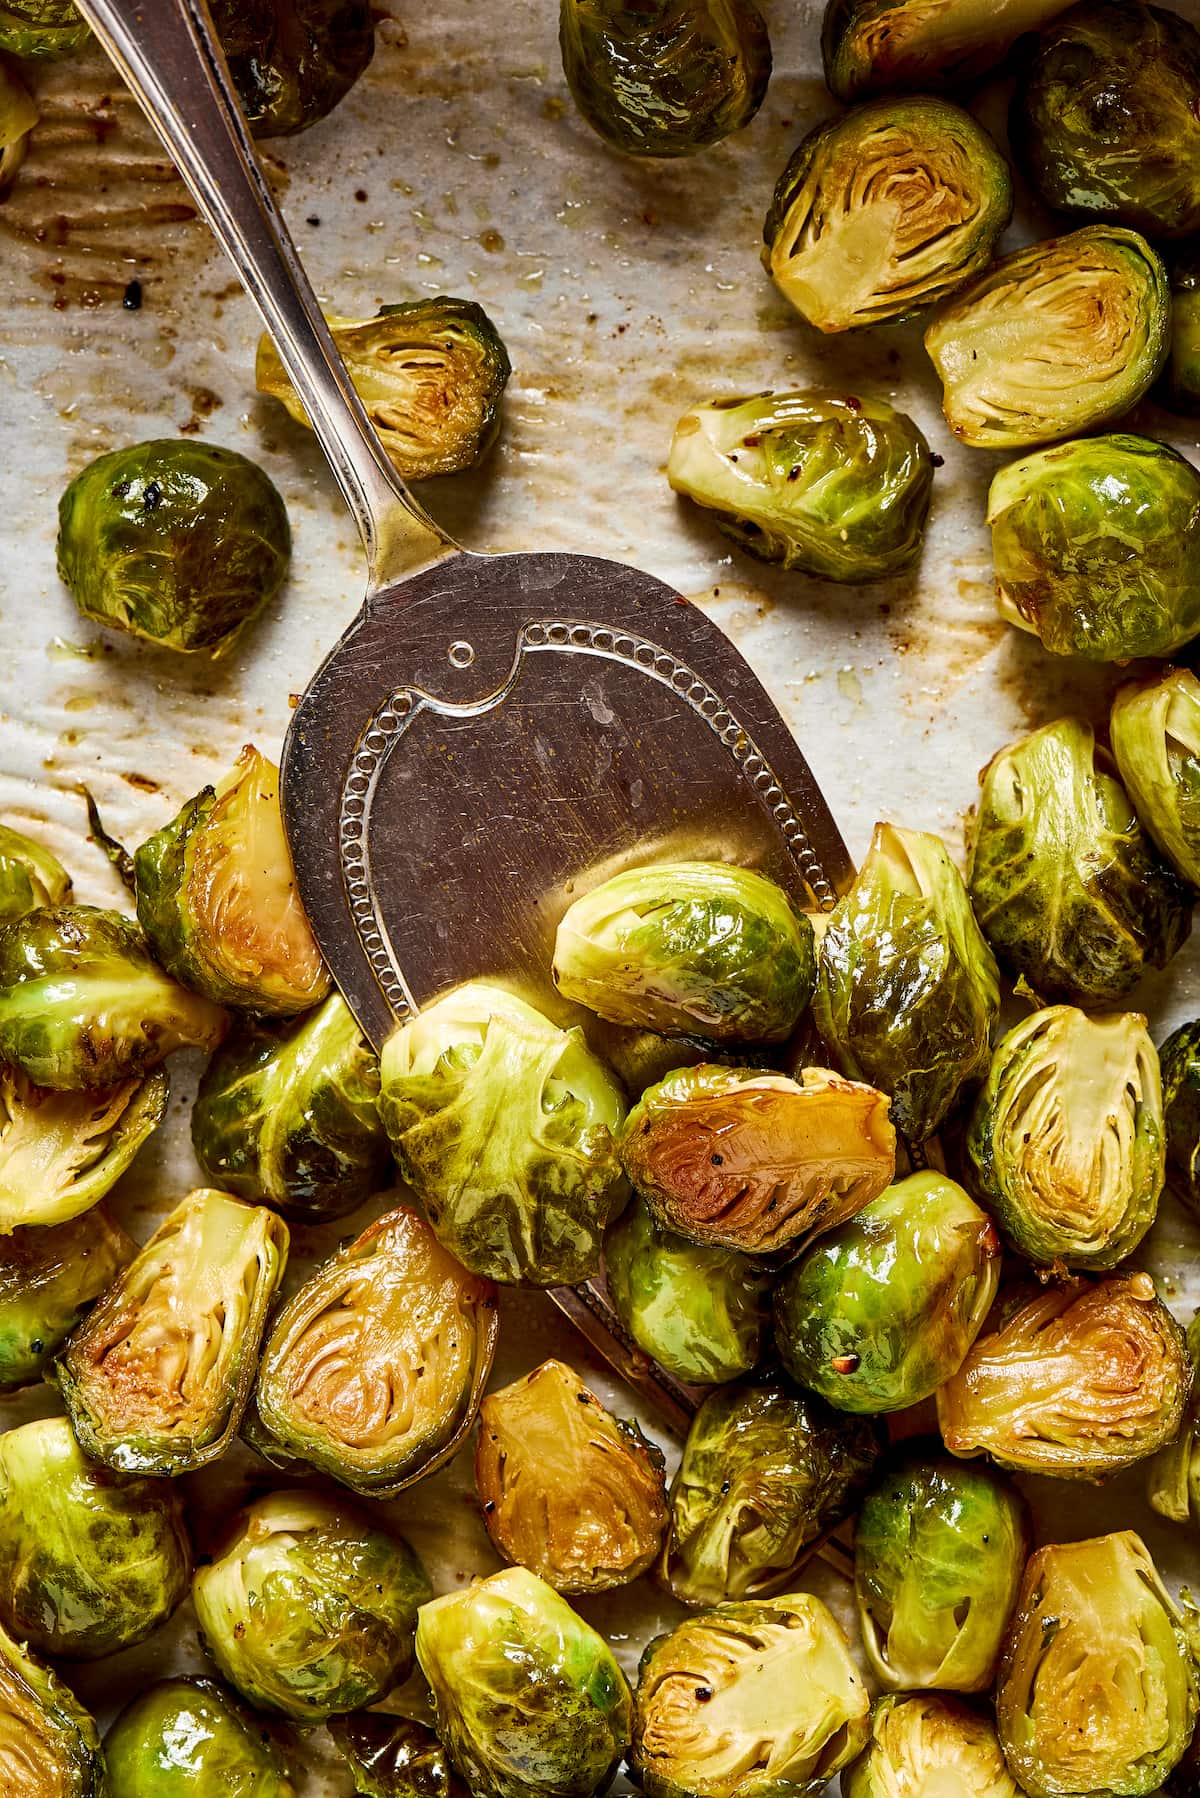 Roasted-Brussel-Sprouts-with-Balsamic-Vinegar40677.jpg